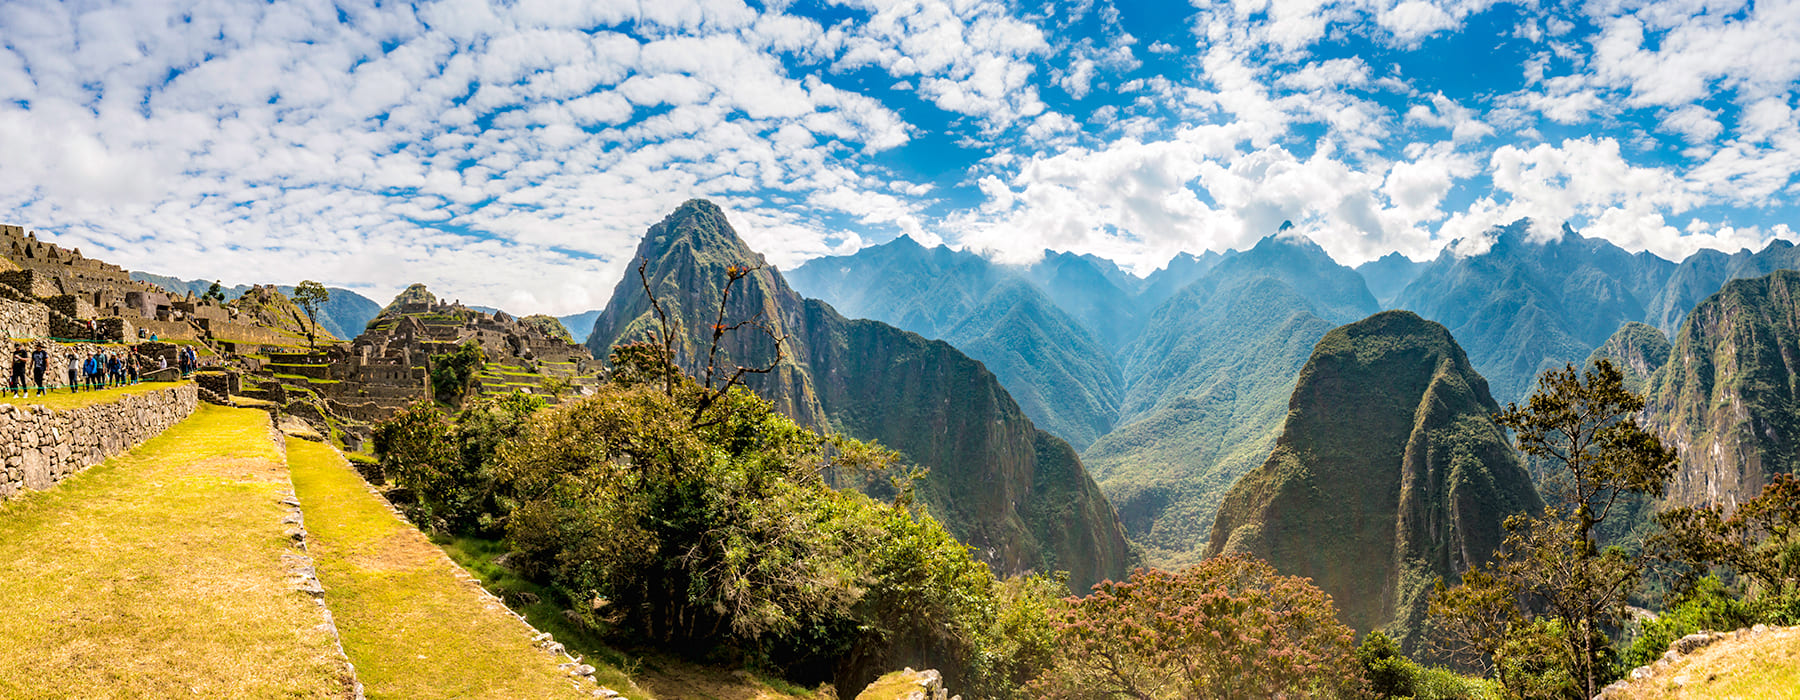 HOW LONG IS THE INCA TRAIL?